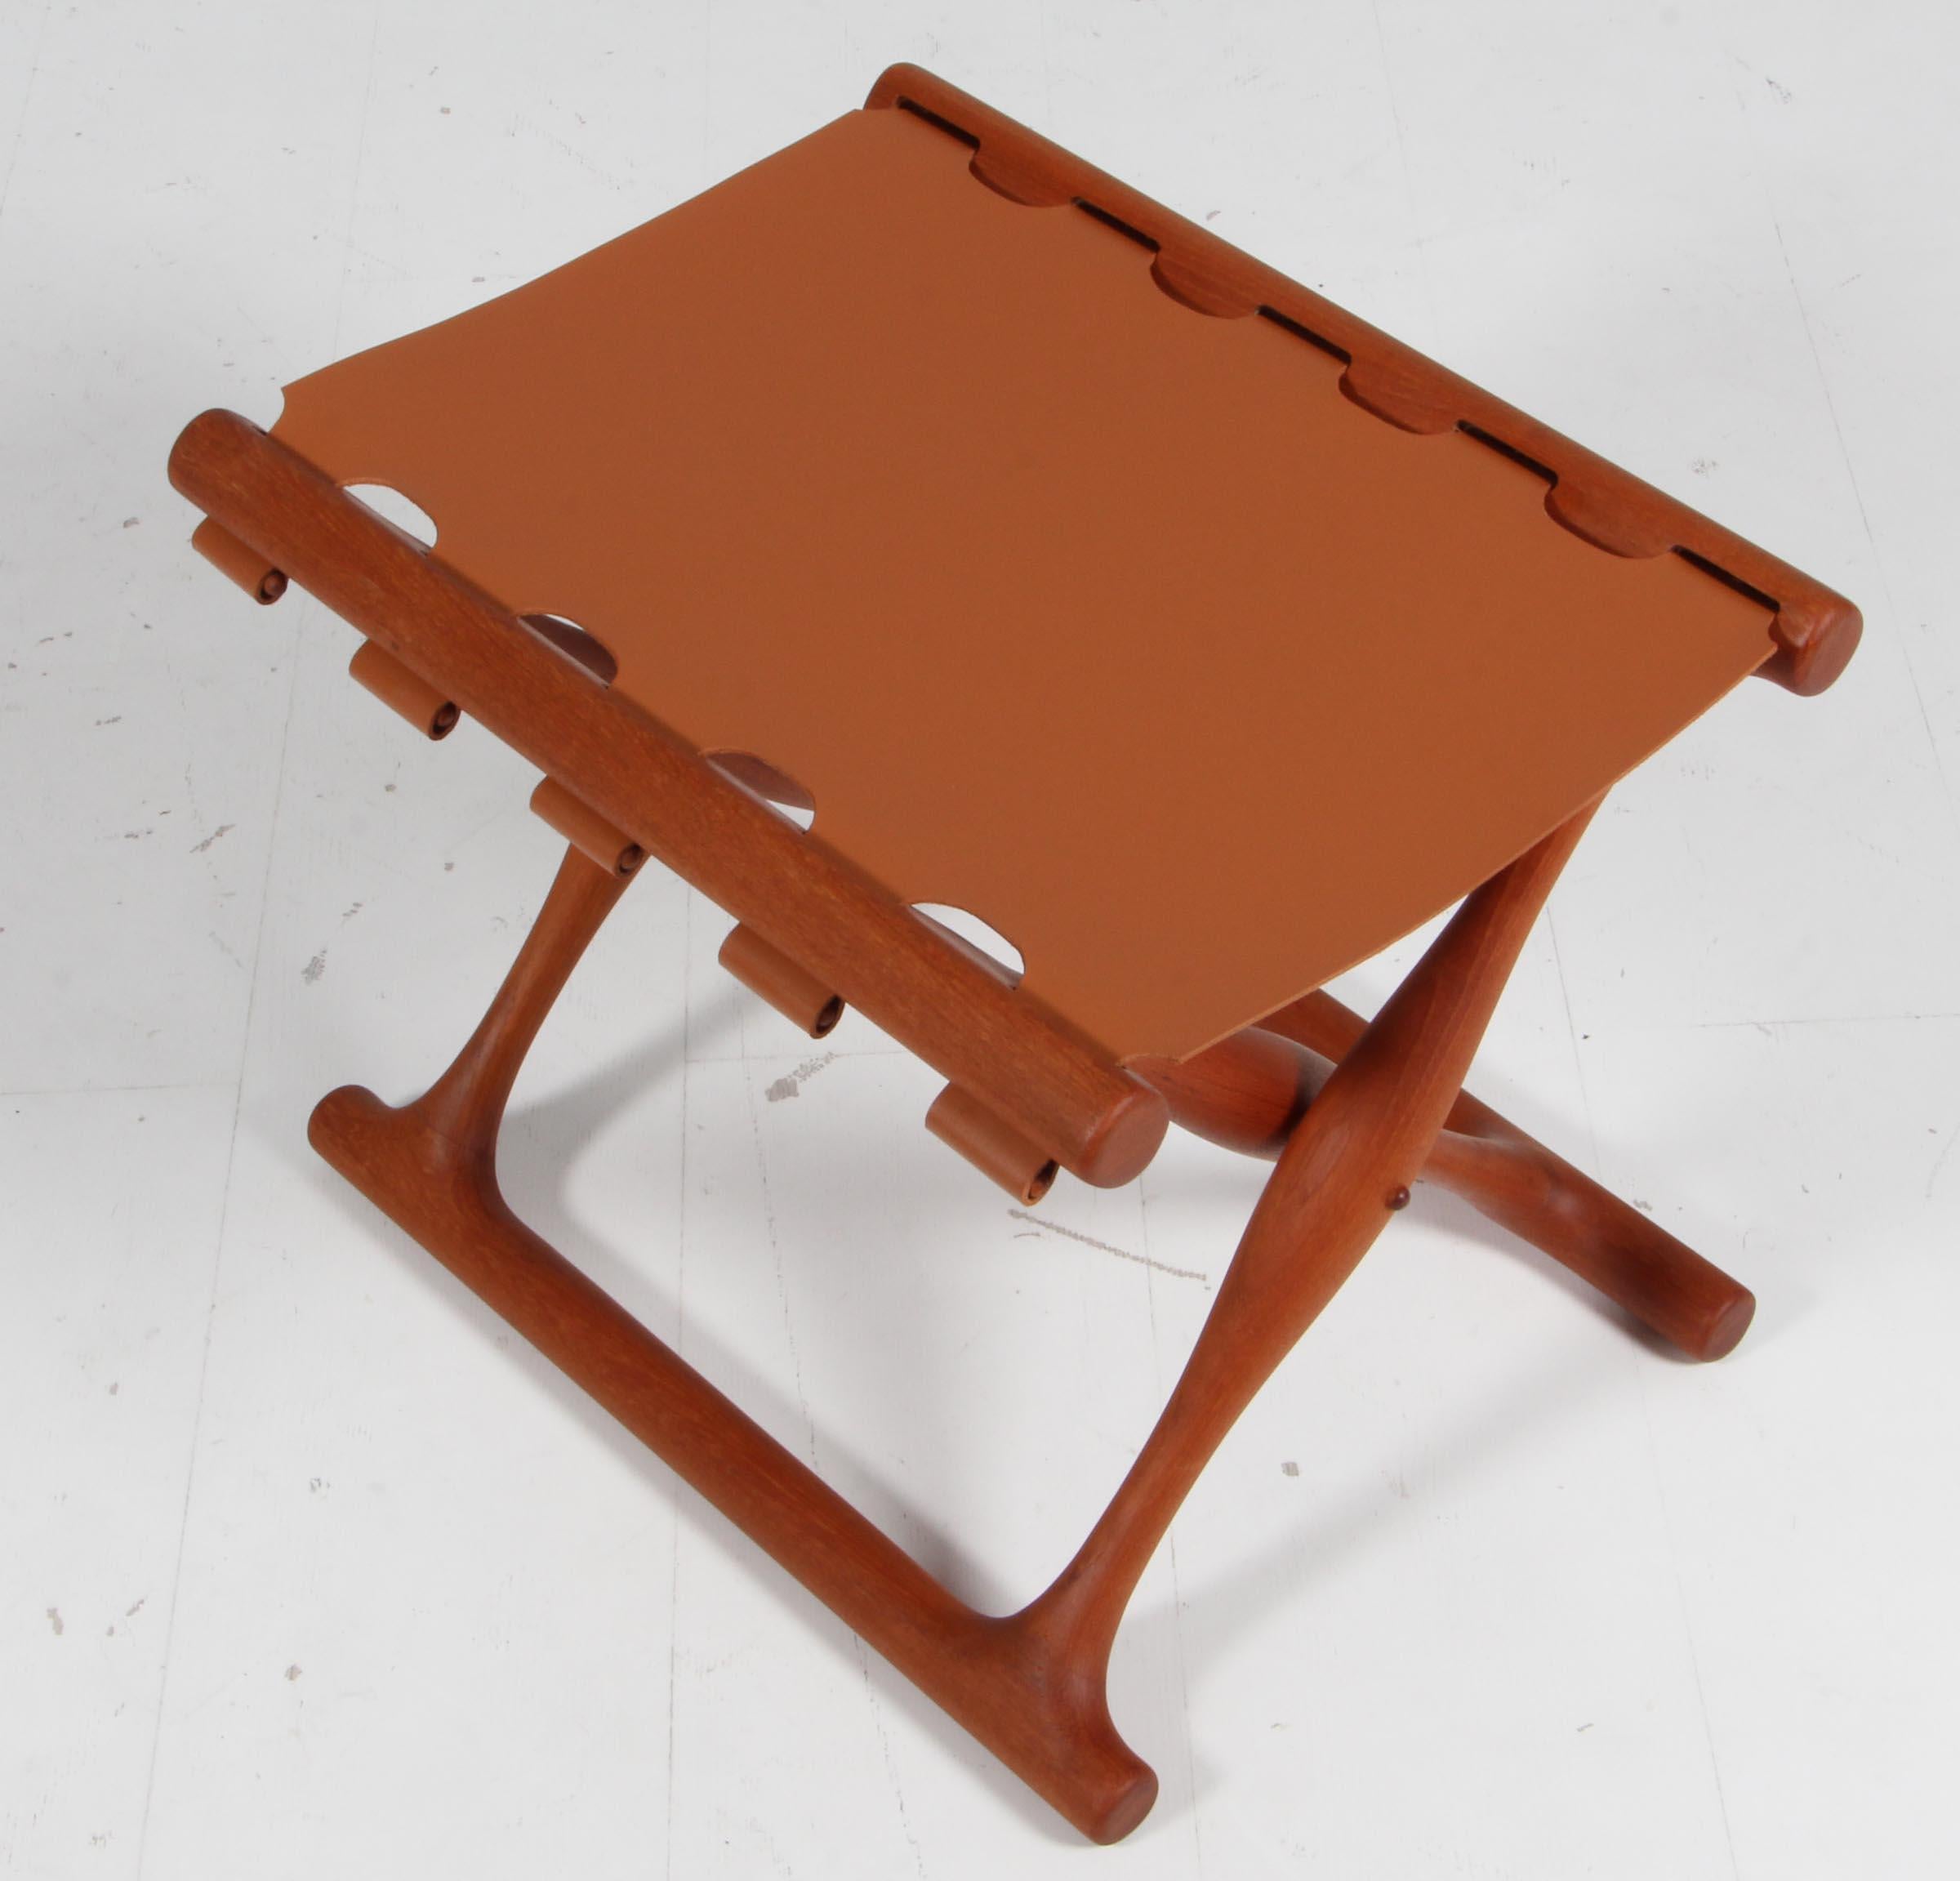 The iconic model 41 folding stool in beautifully aged Danish teak new cognac brown saddle leather seat. The Guldhoj stool was designed as a replica of a Bronze Age artefact found in Vamdrup, Denmark that dates back to 1300 BC. The stool is therefore